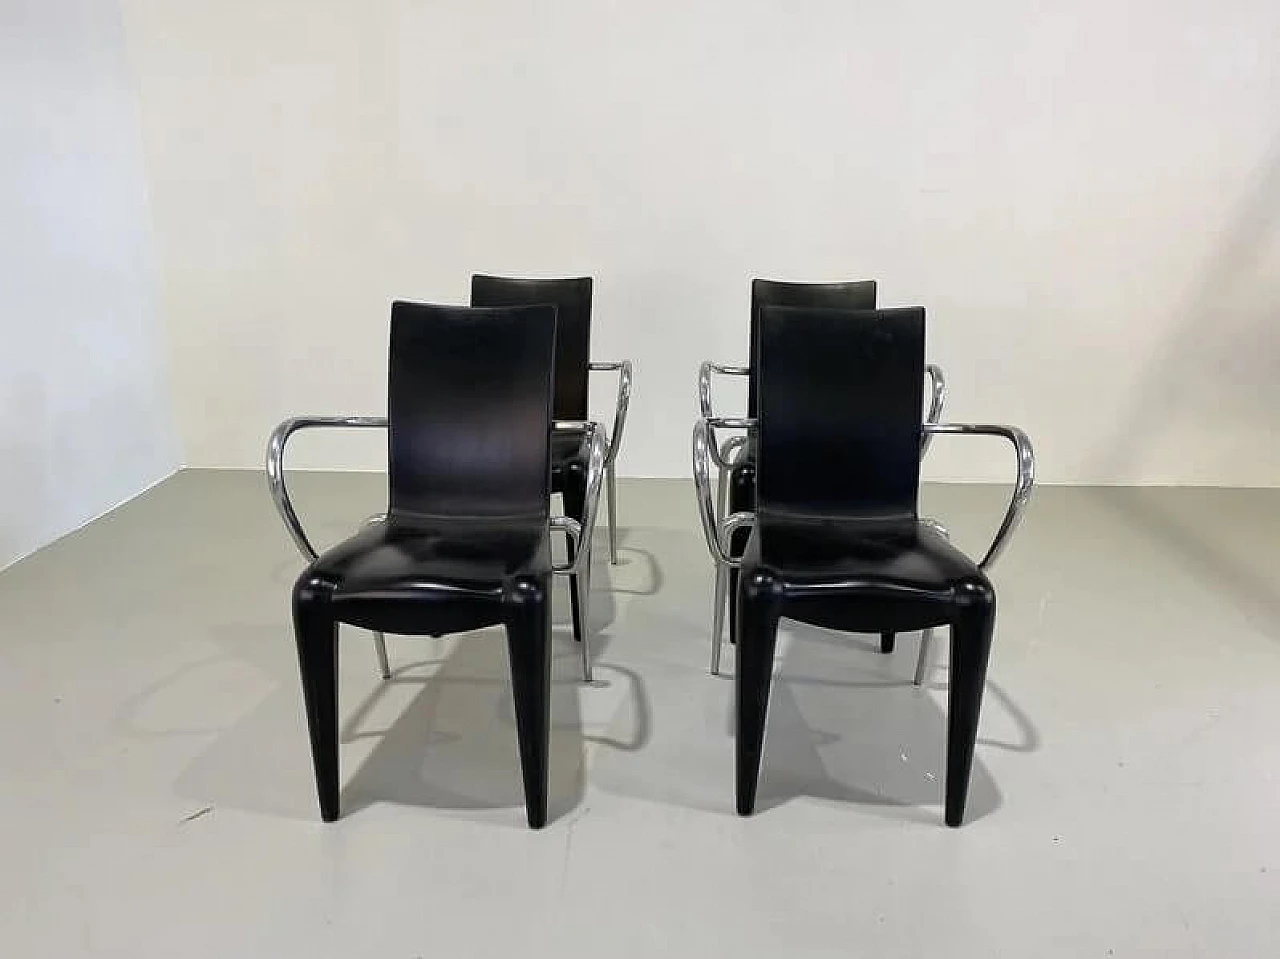 4 Louis 20 armchairs by Philippe Starck for Vitra 1